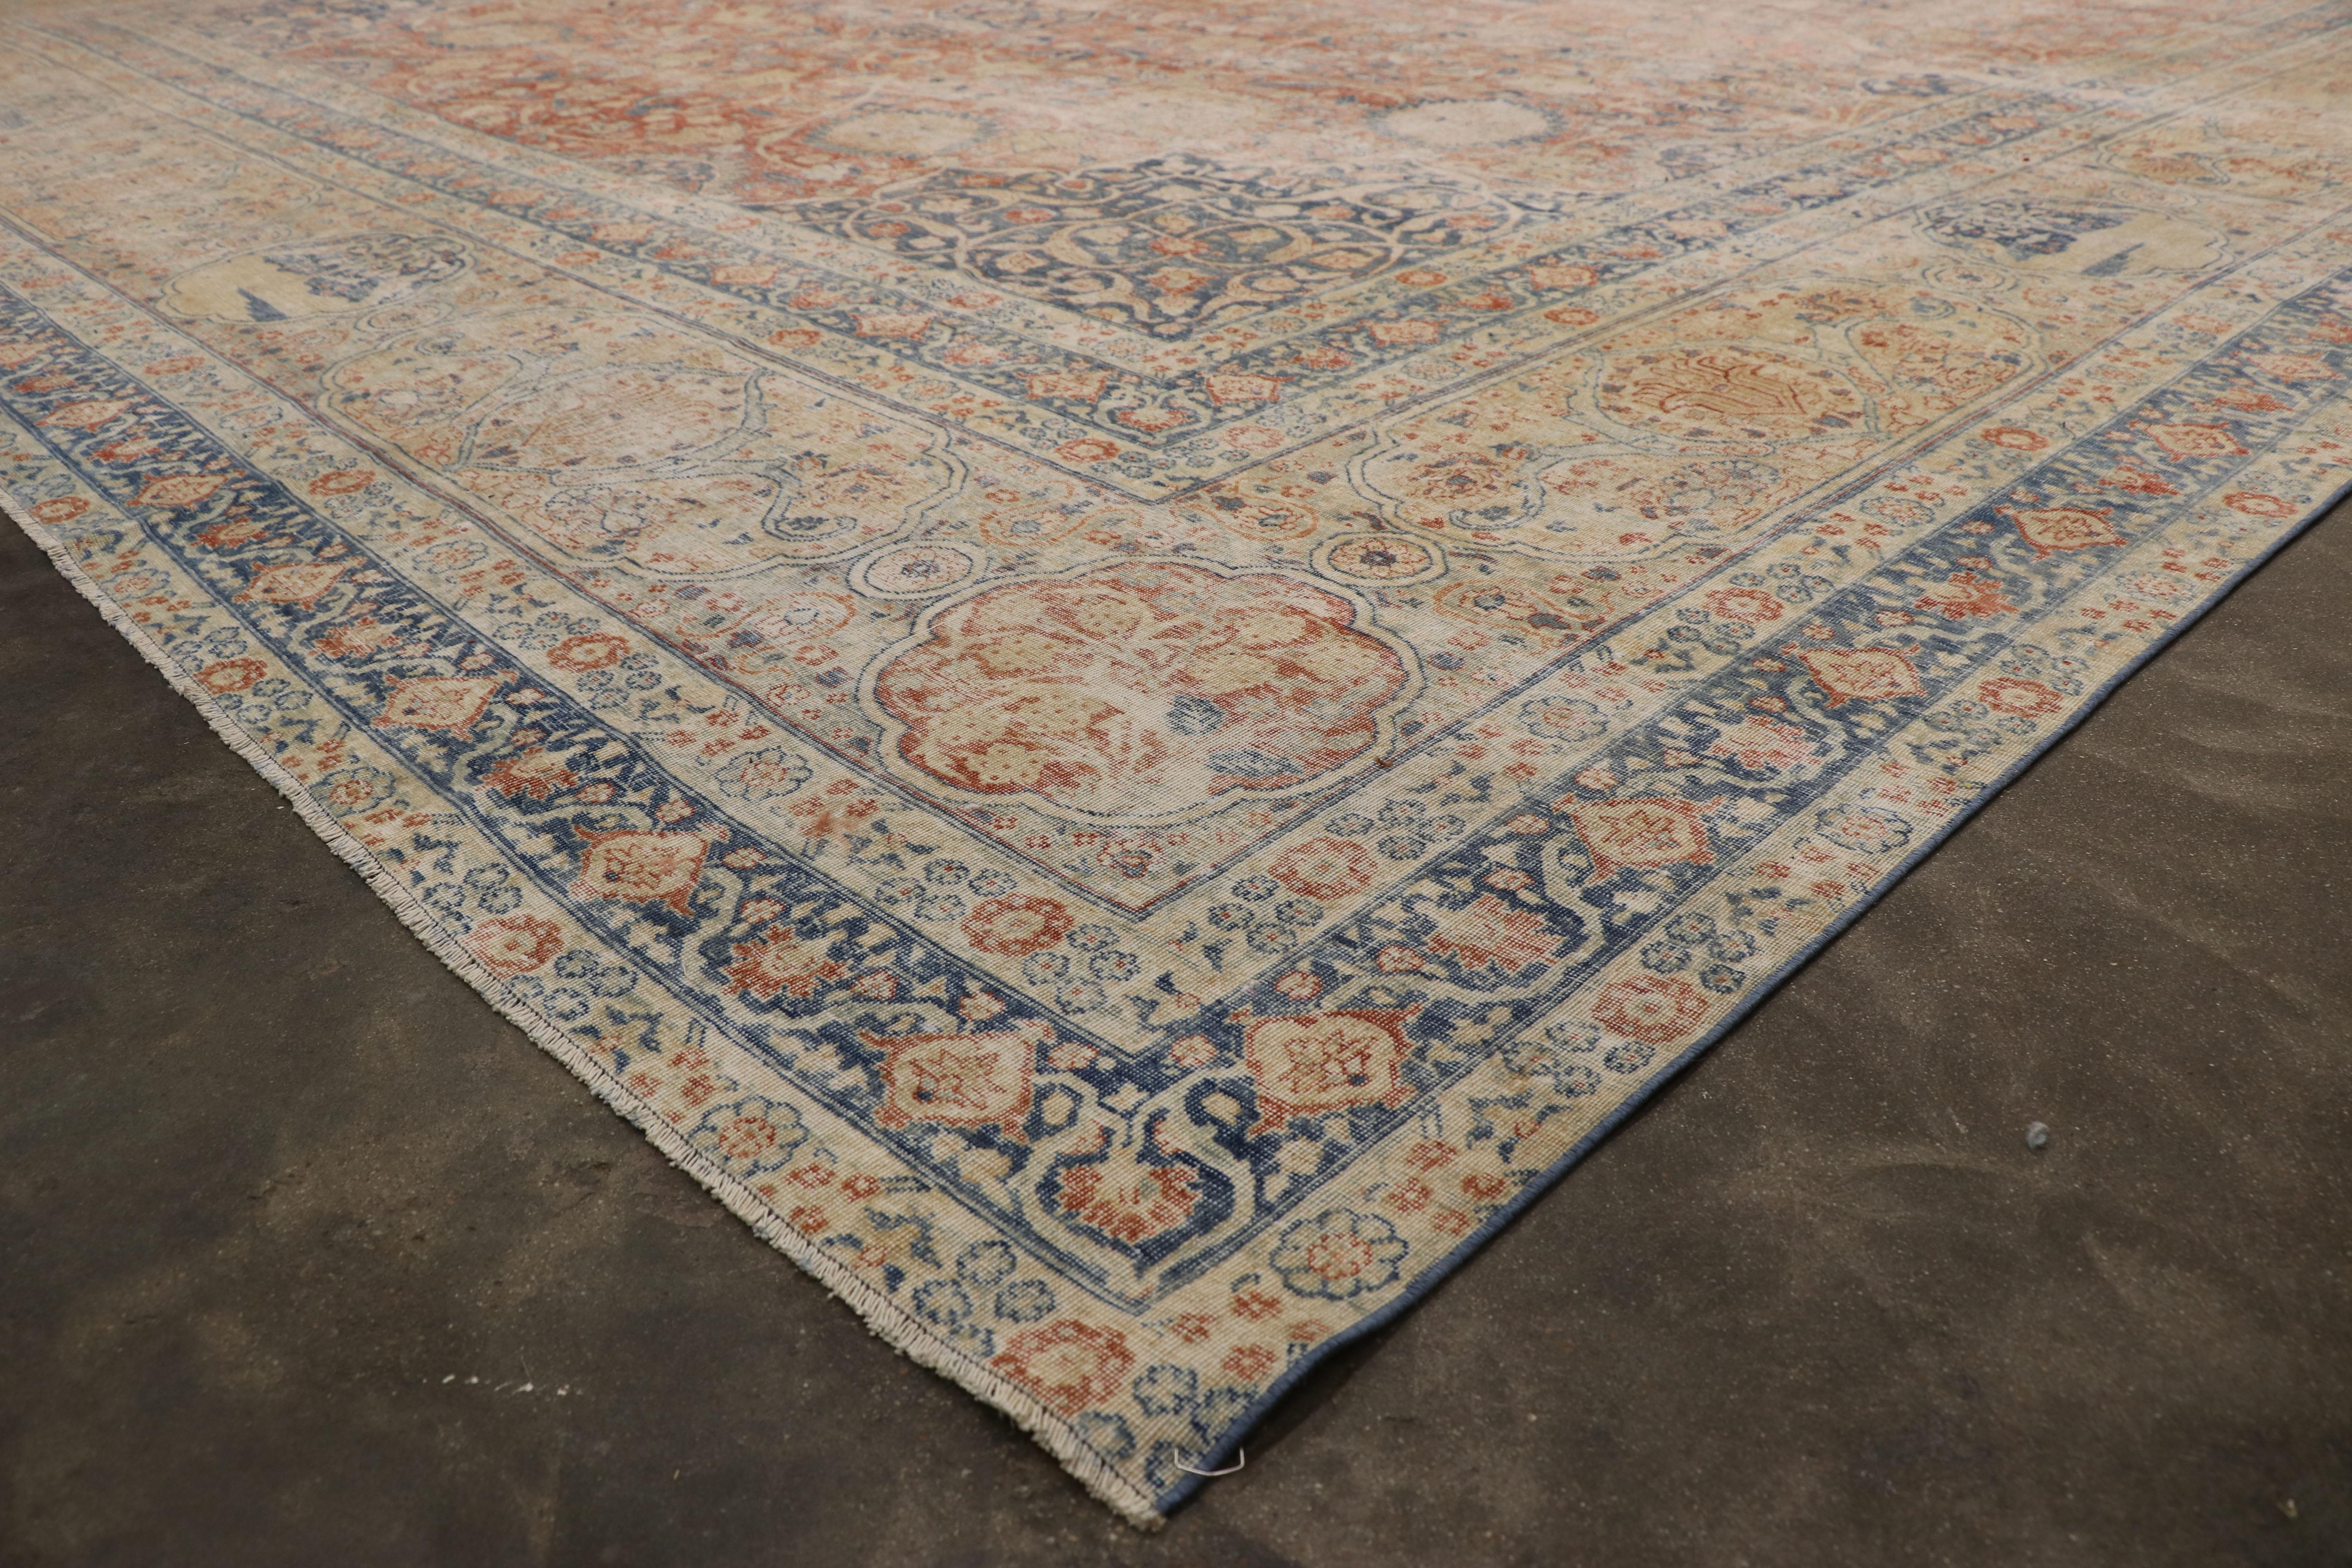 Wool Distressed Antique Persian Tabriz Palace Rug with Rustic Relaxed Federal Style